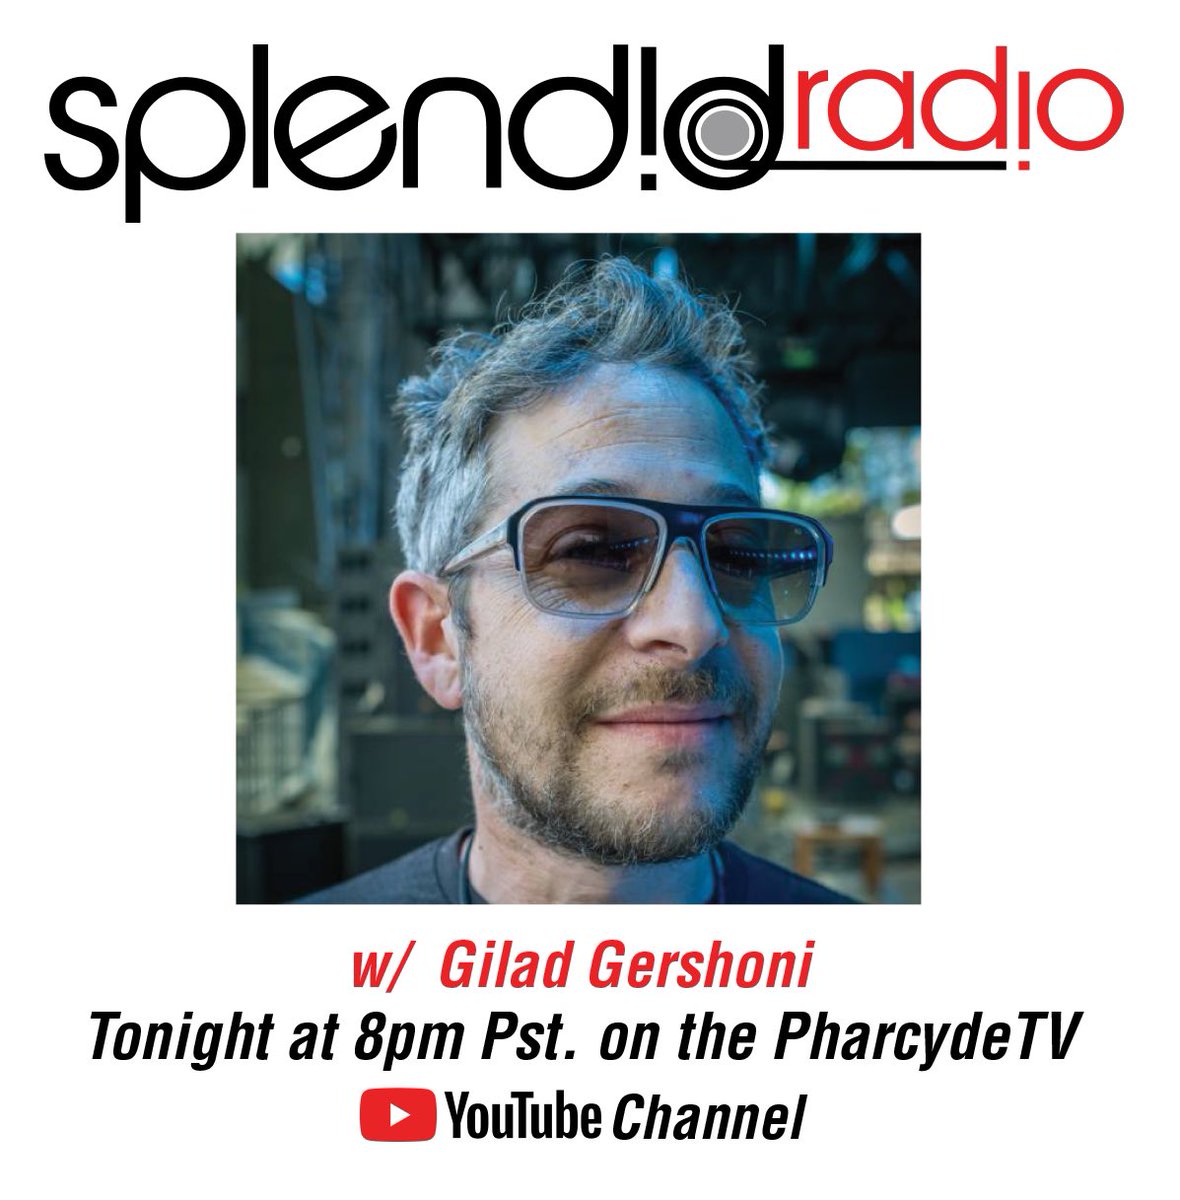 Tonight at 8pm Pst. We're all the way live on @Youtube / PharcydeTV channel with this week's episode of #SplendidRadio with @schmooche and @giladgershoni #DigitalStrategest and #TechnicalDirector of #DeLaSoul This week's episode is brought to you by @theseedsofxanxadu